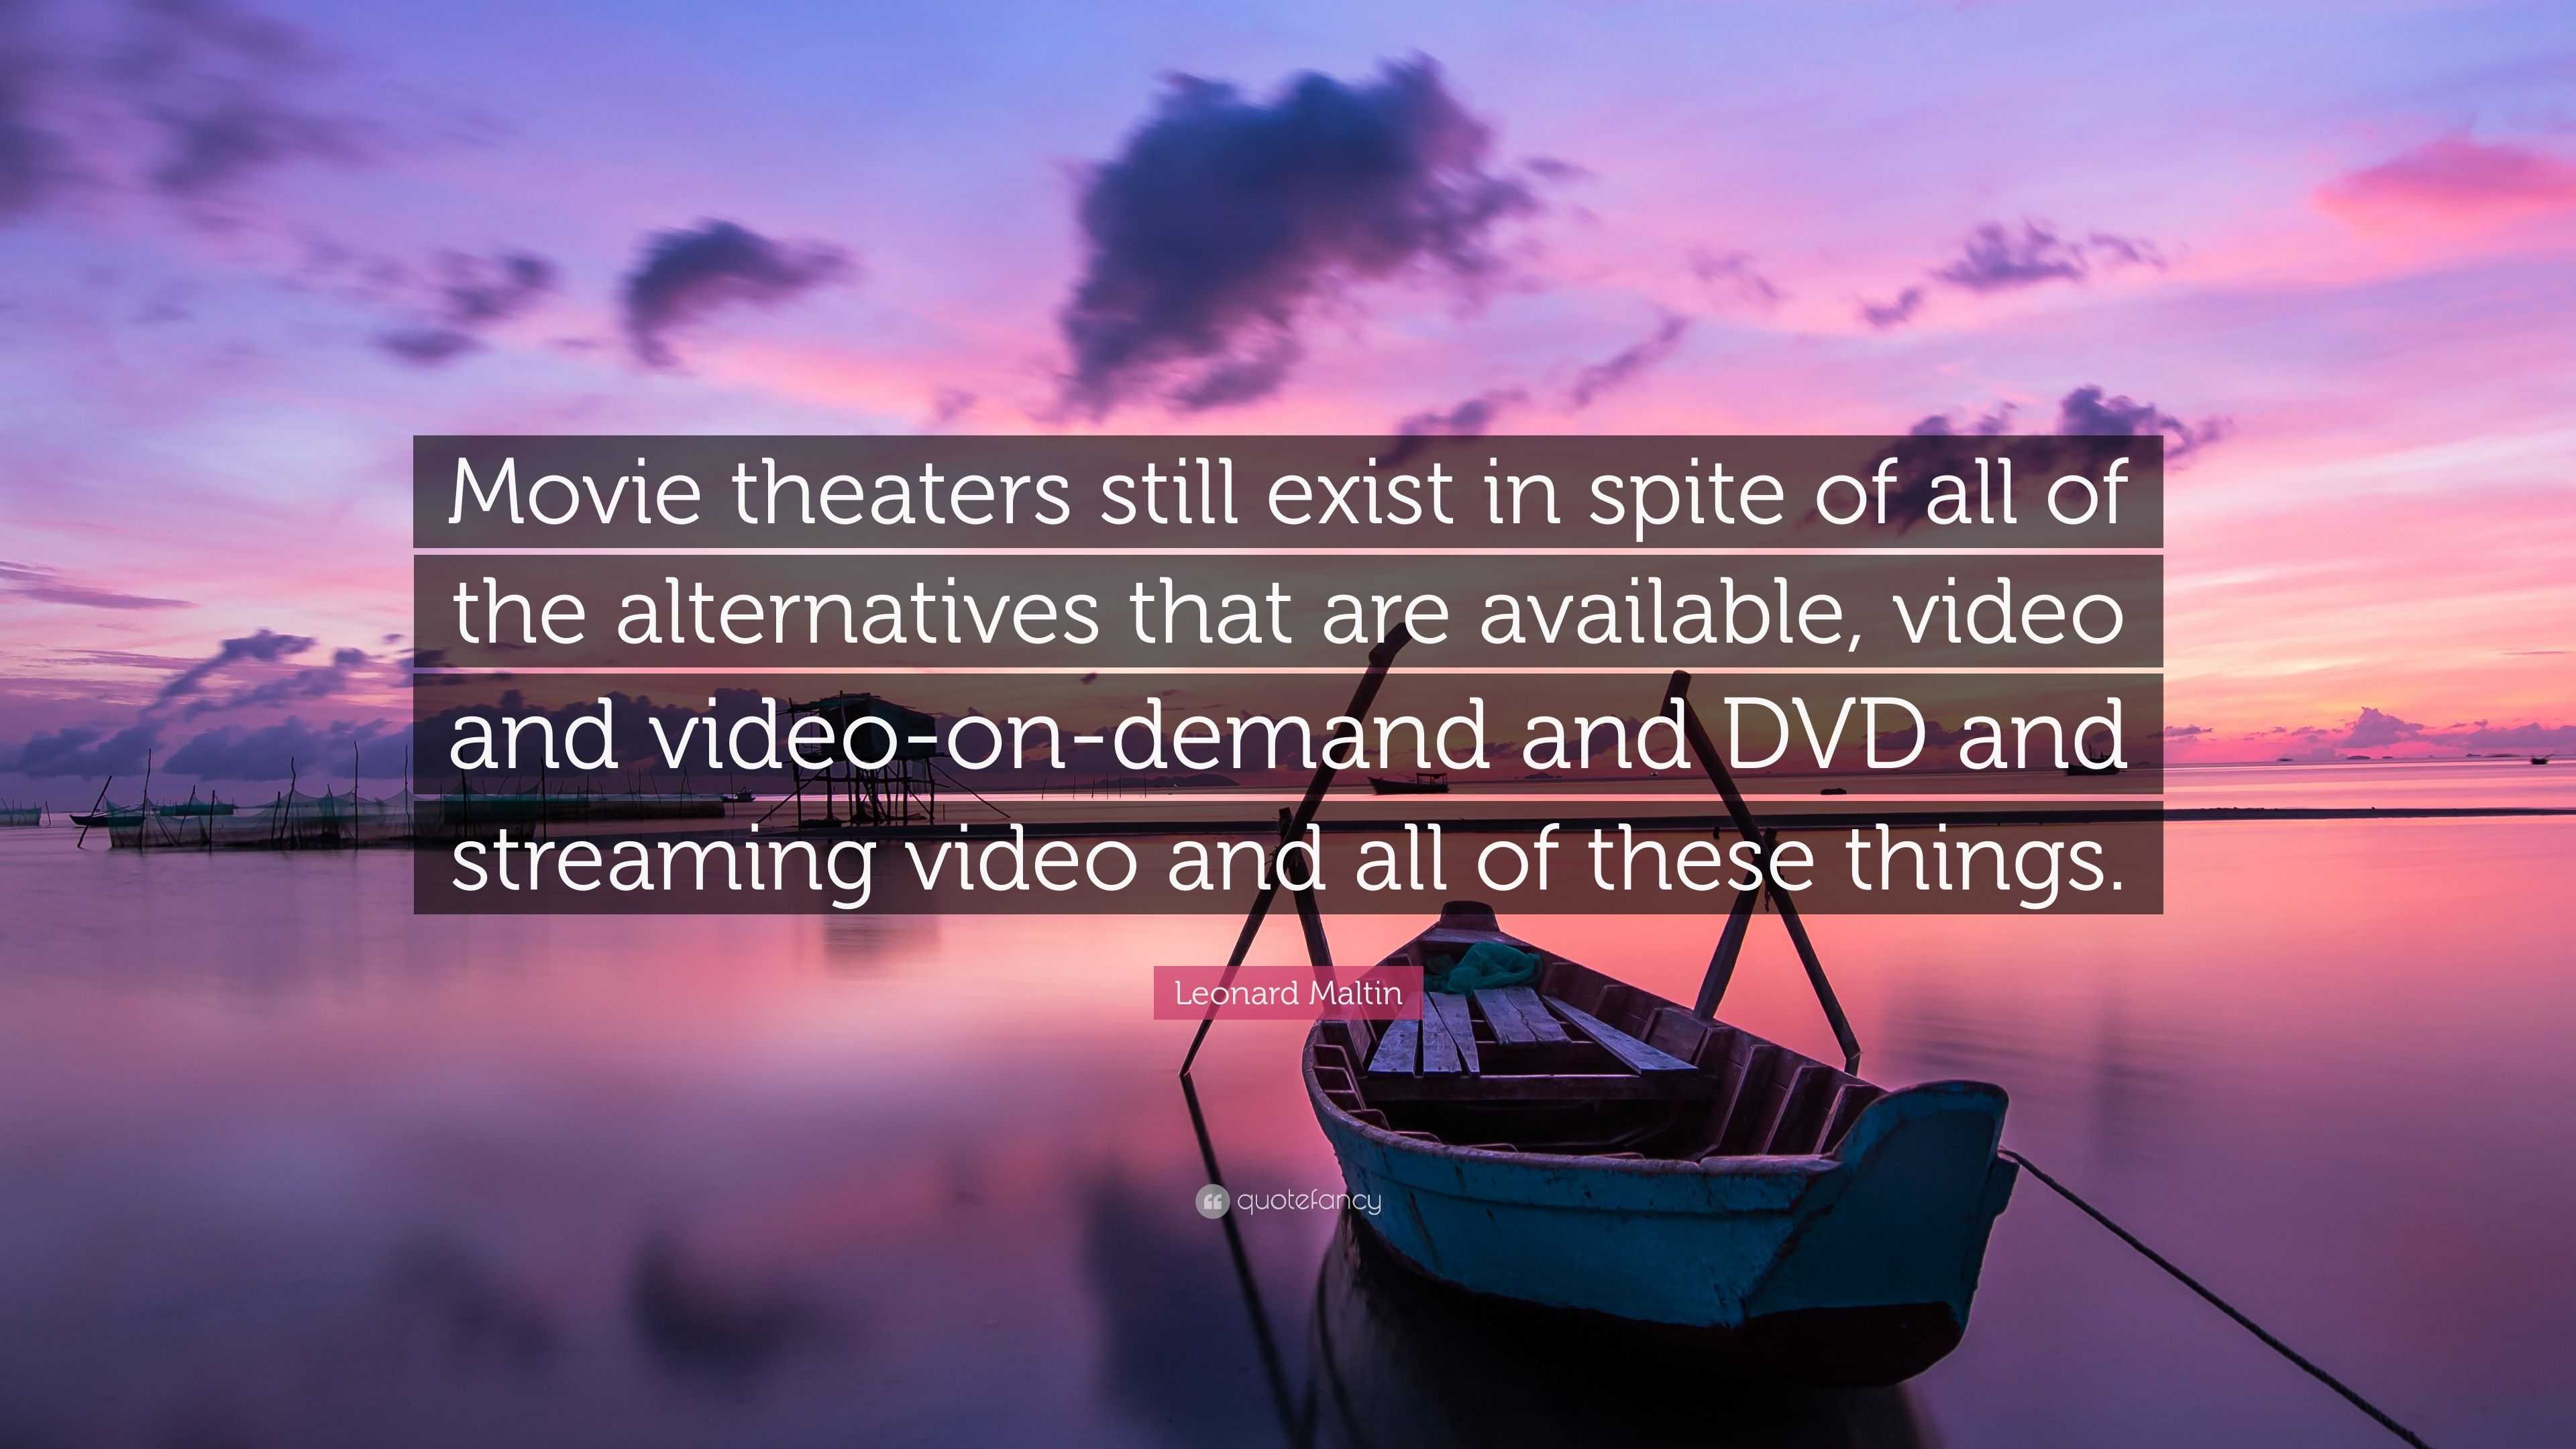 Leonard Maltin Quote “Movie theaters still exist in spite of all of the alternatives that are available, video and video-on-demand and DVD and...”